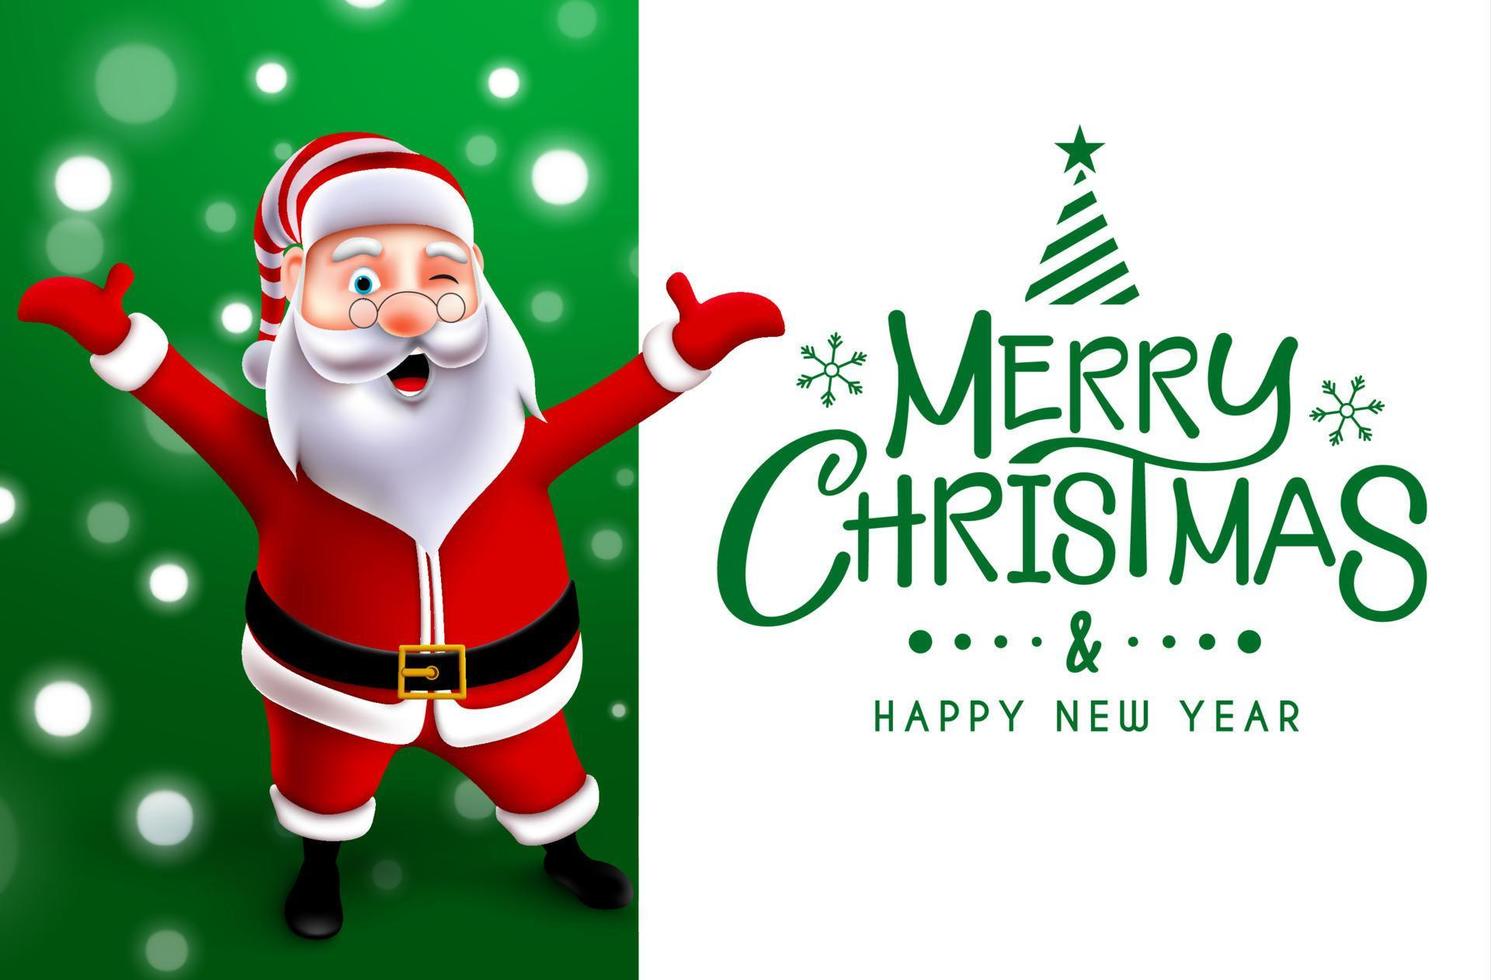 Christmas santa greeting vector template design. Merry christmas text in white empty space with santa claus character for xmas messages card. Vector illustration.